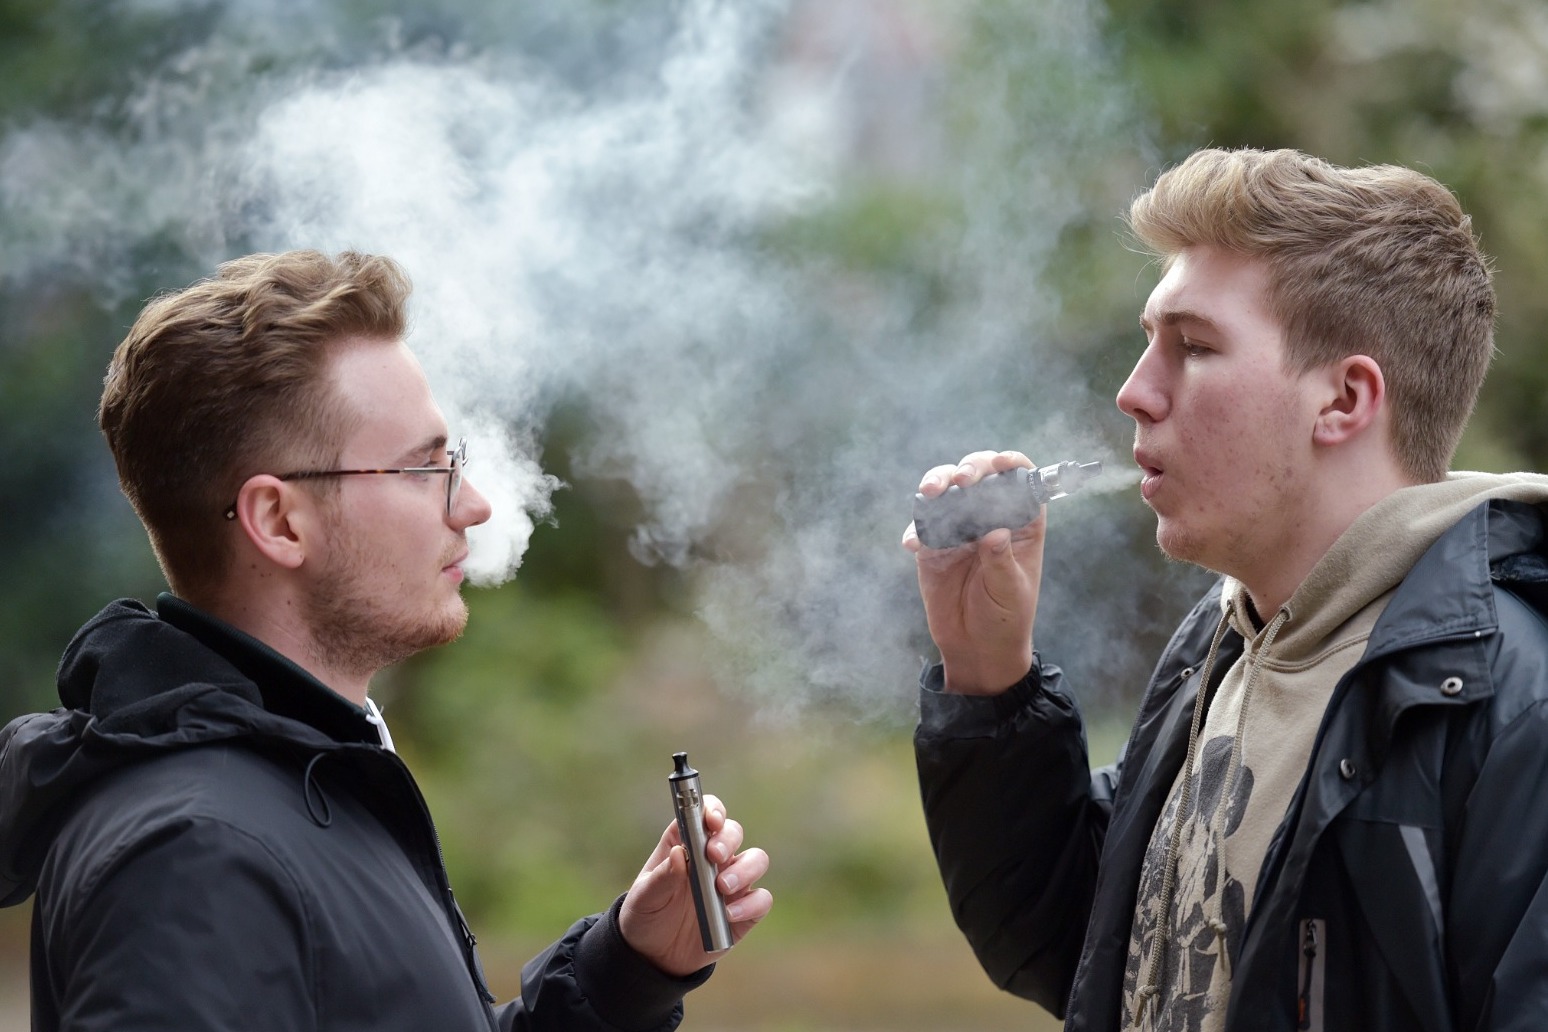 Vapes ‘best way to quit smoking’ but linked to stress in young people – research 